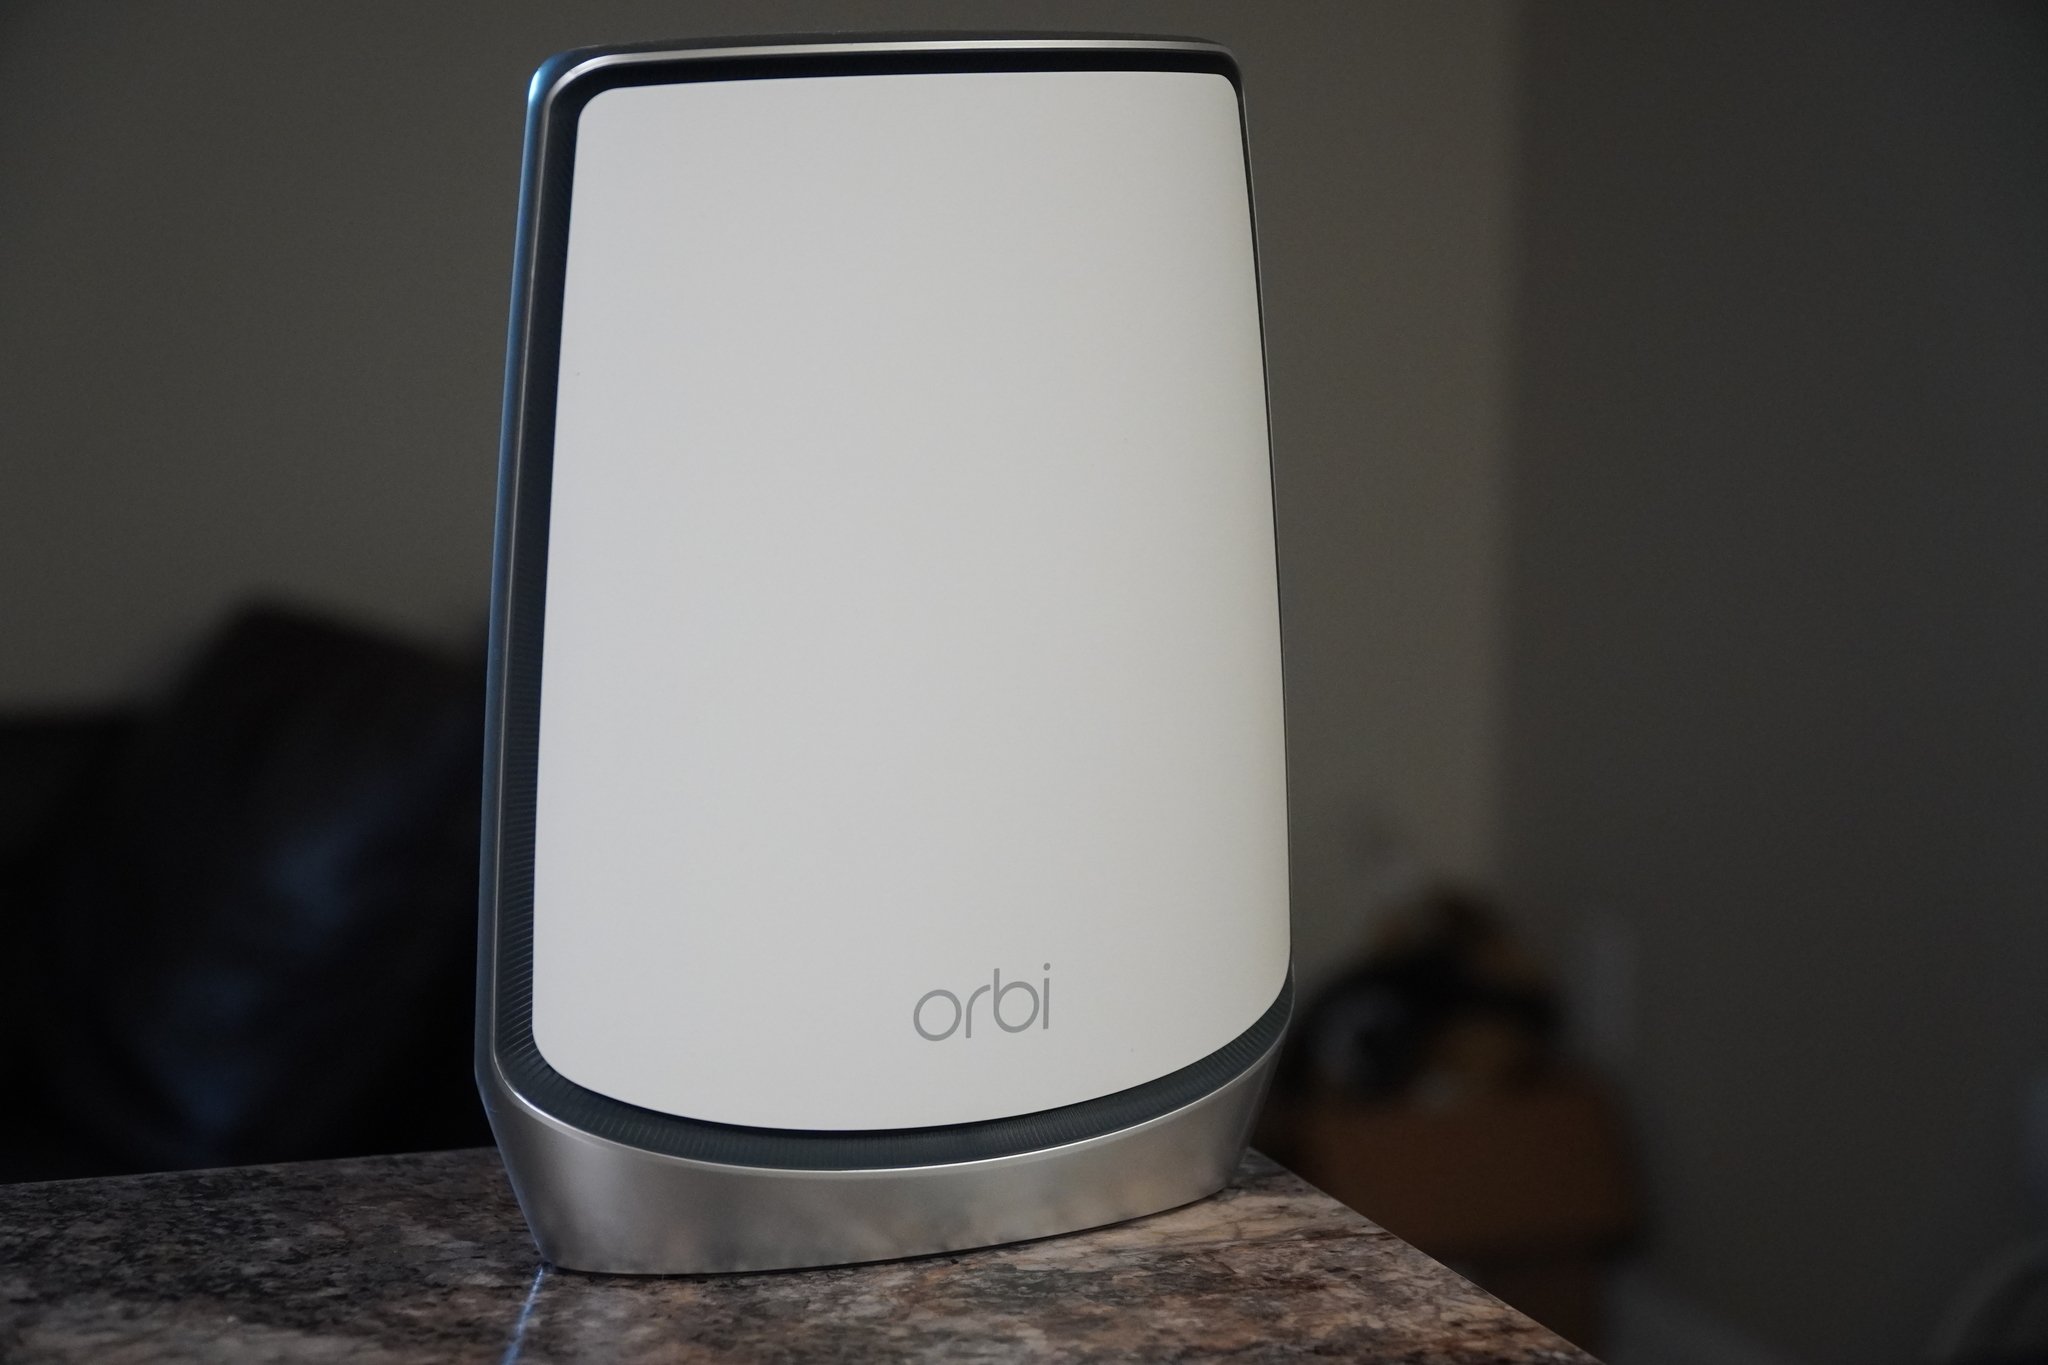 https://www.androidcentral.com/sites/androidcentral.com/files/styles/large_wm_brw/public/article_images/2020/07/netgear-orbi-full-hero.jpg